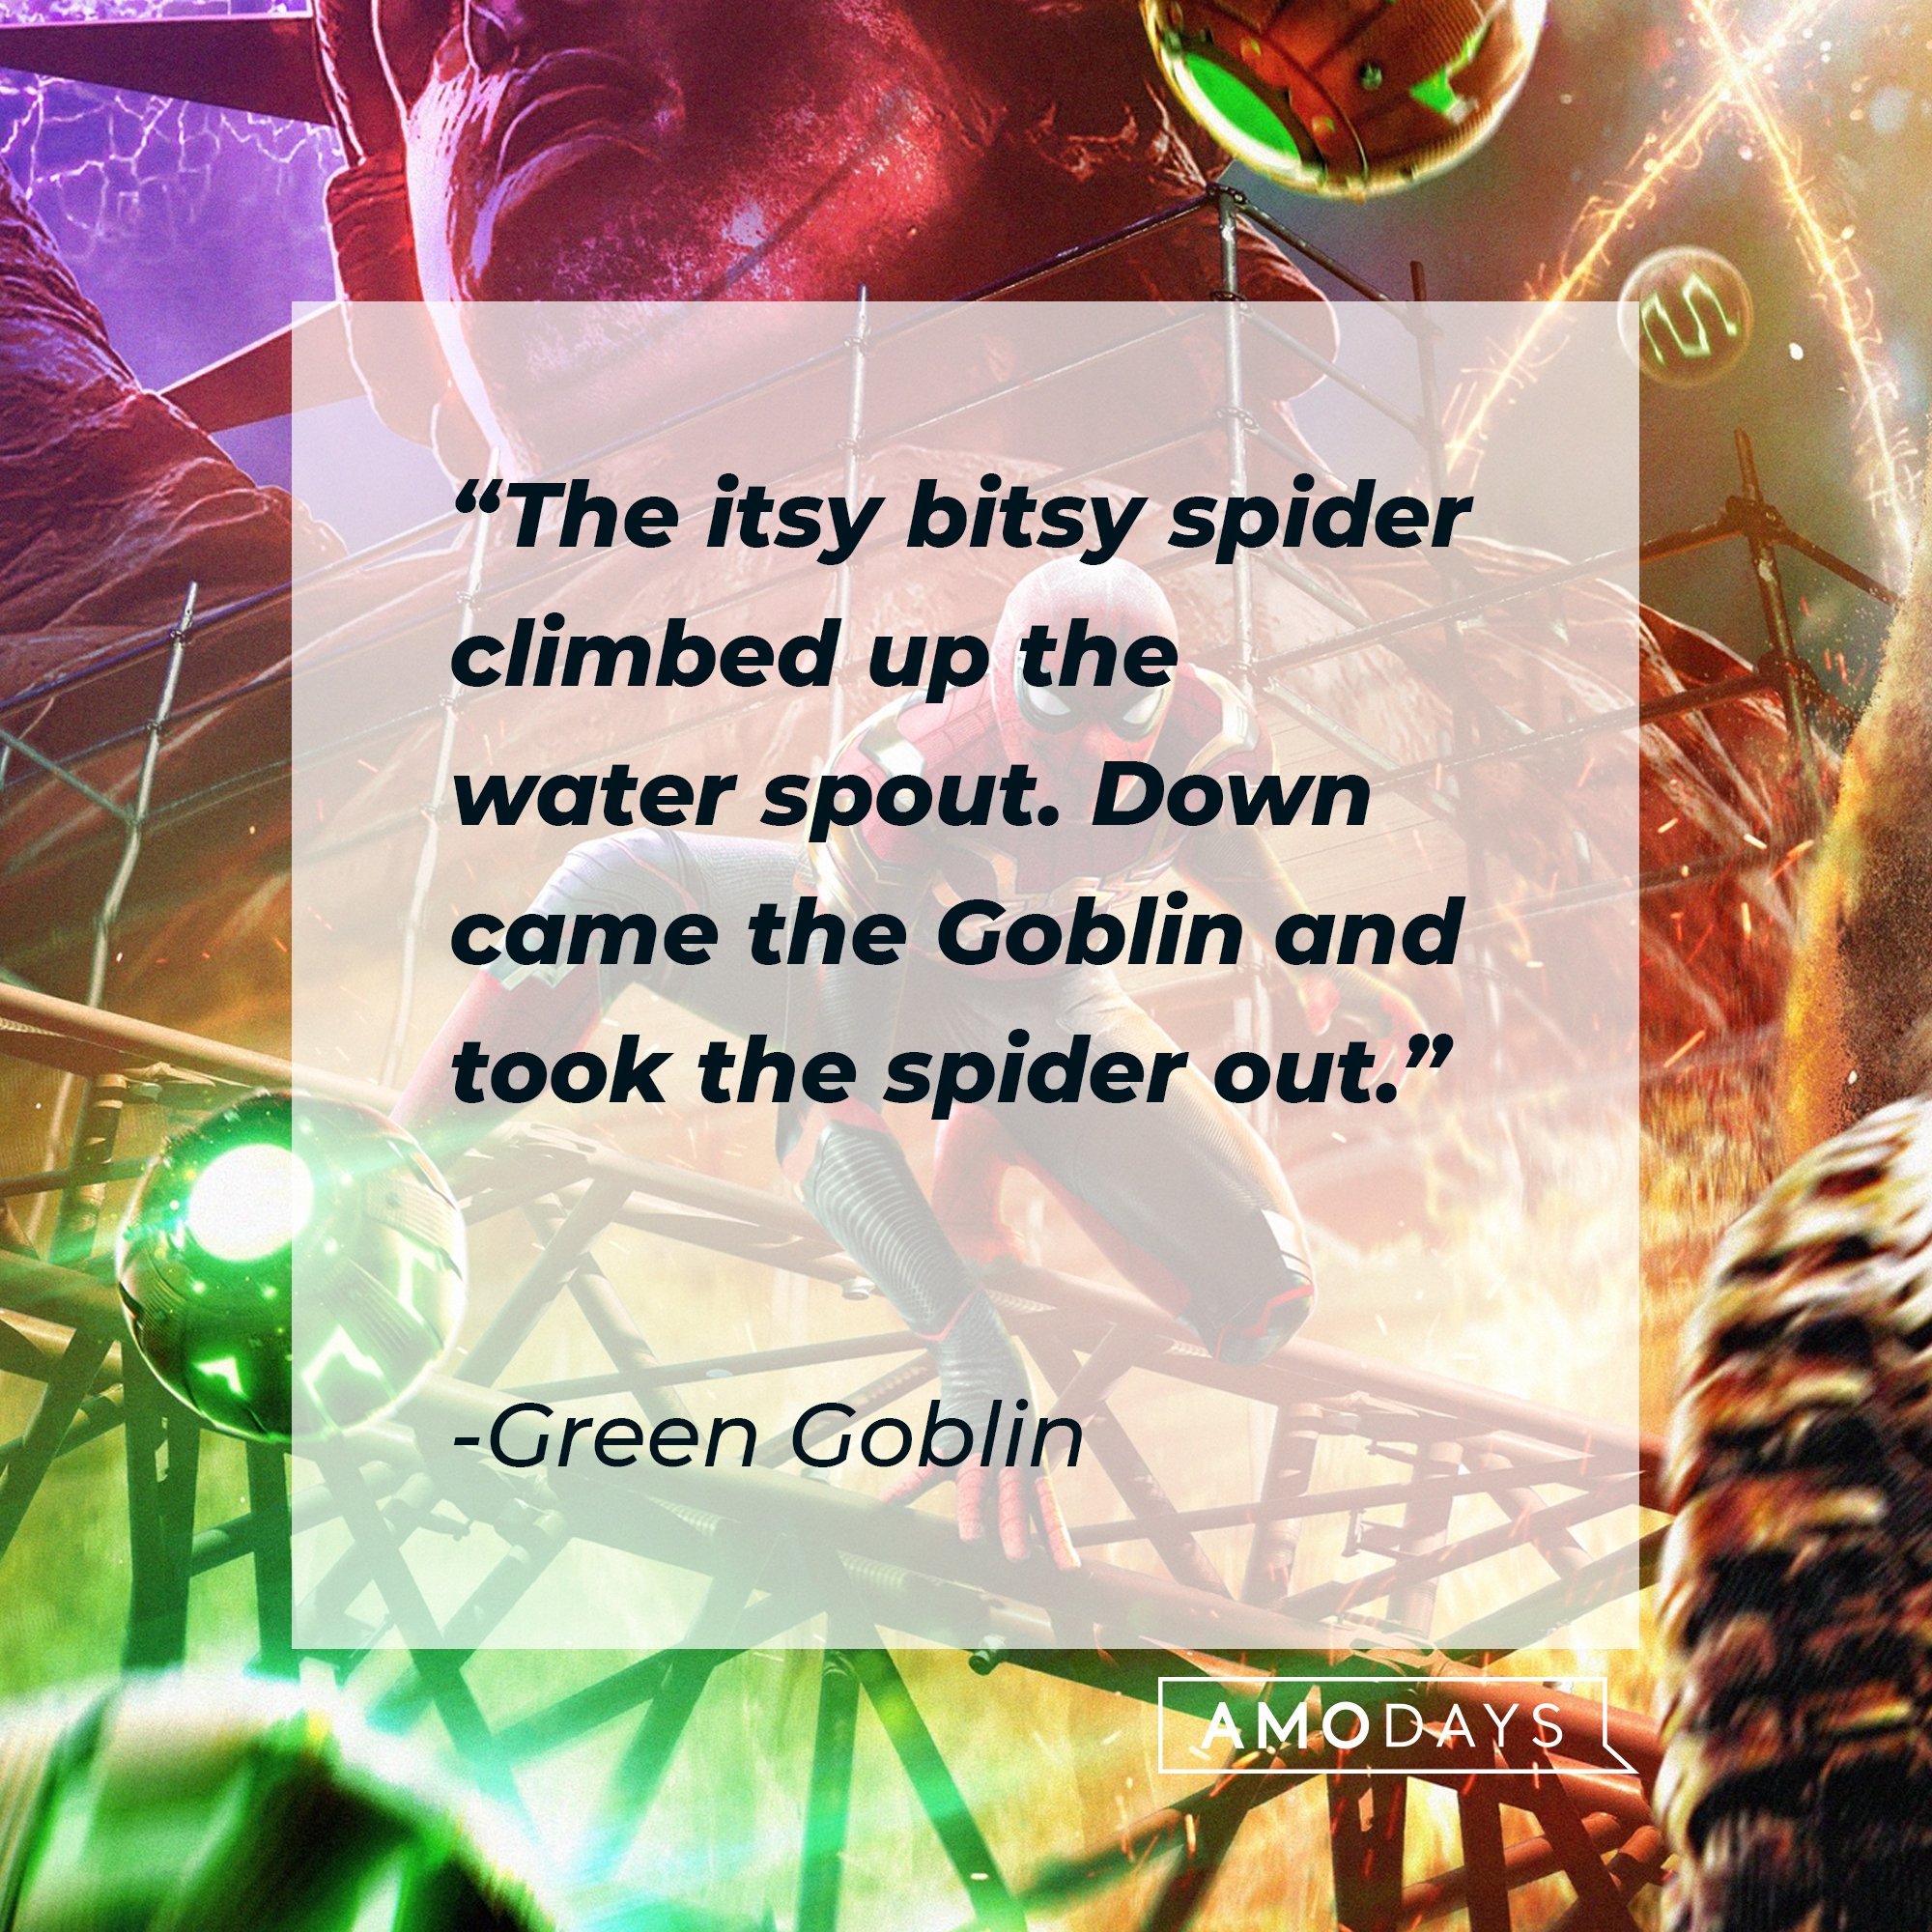 Green Goblin’s quote: “The itsy bitsy spider climbed up the water spout. Down came the Goblin and took the spider out.” | Image: AmoDays